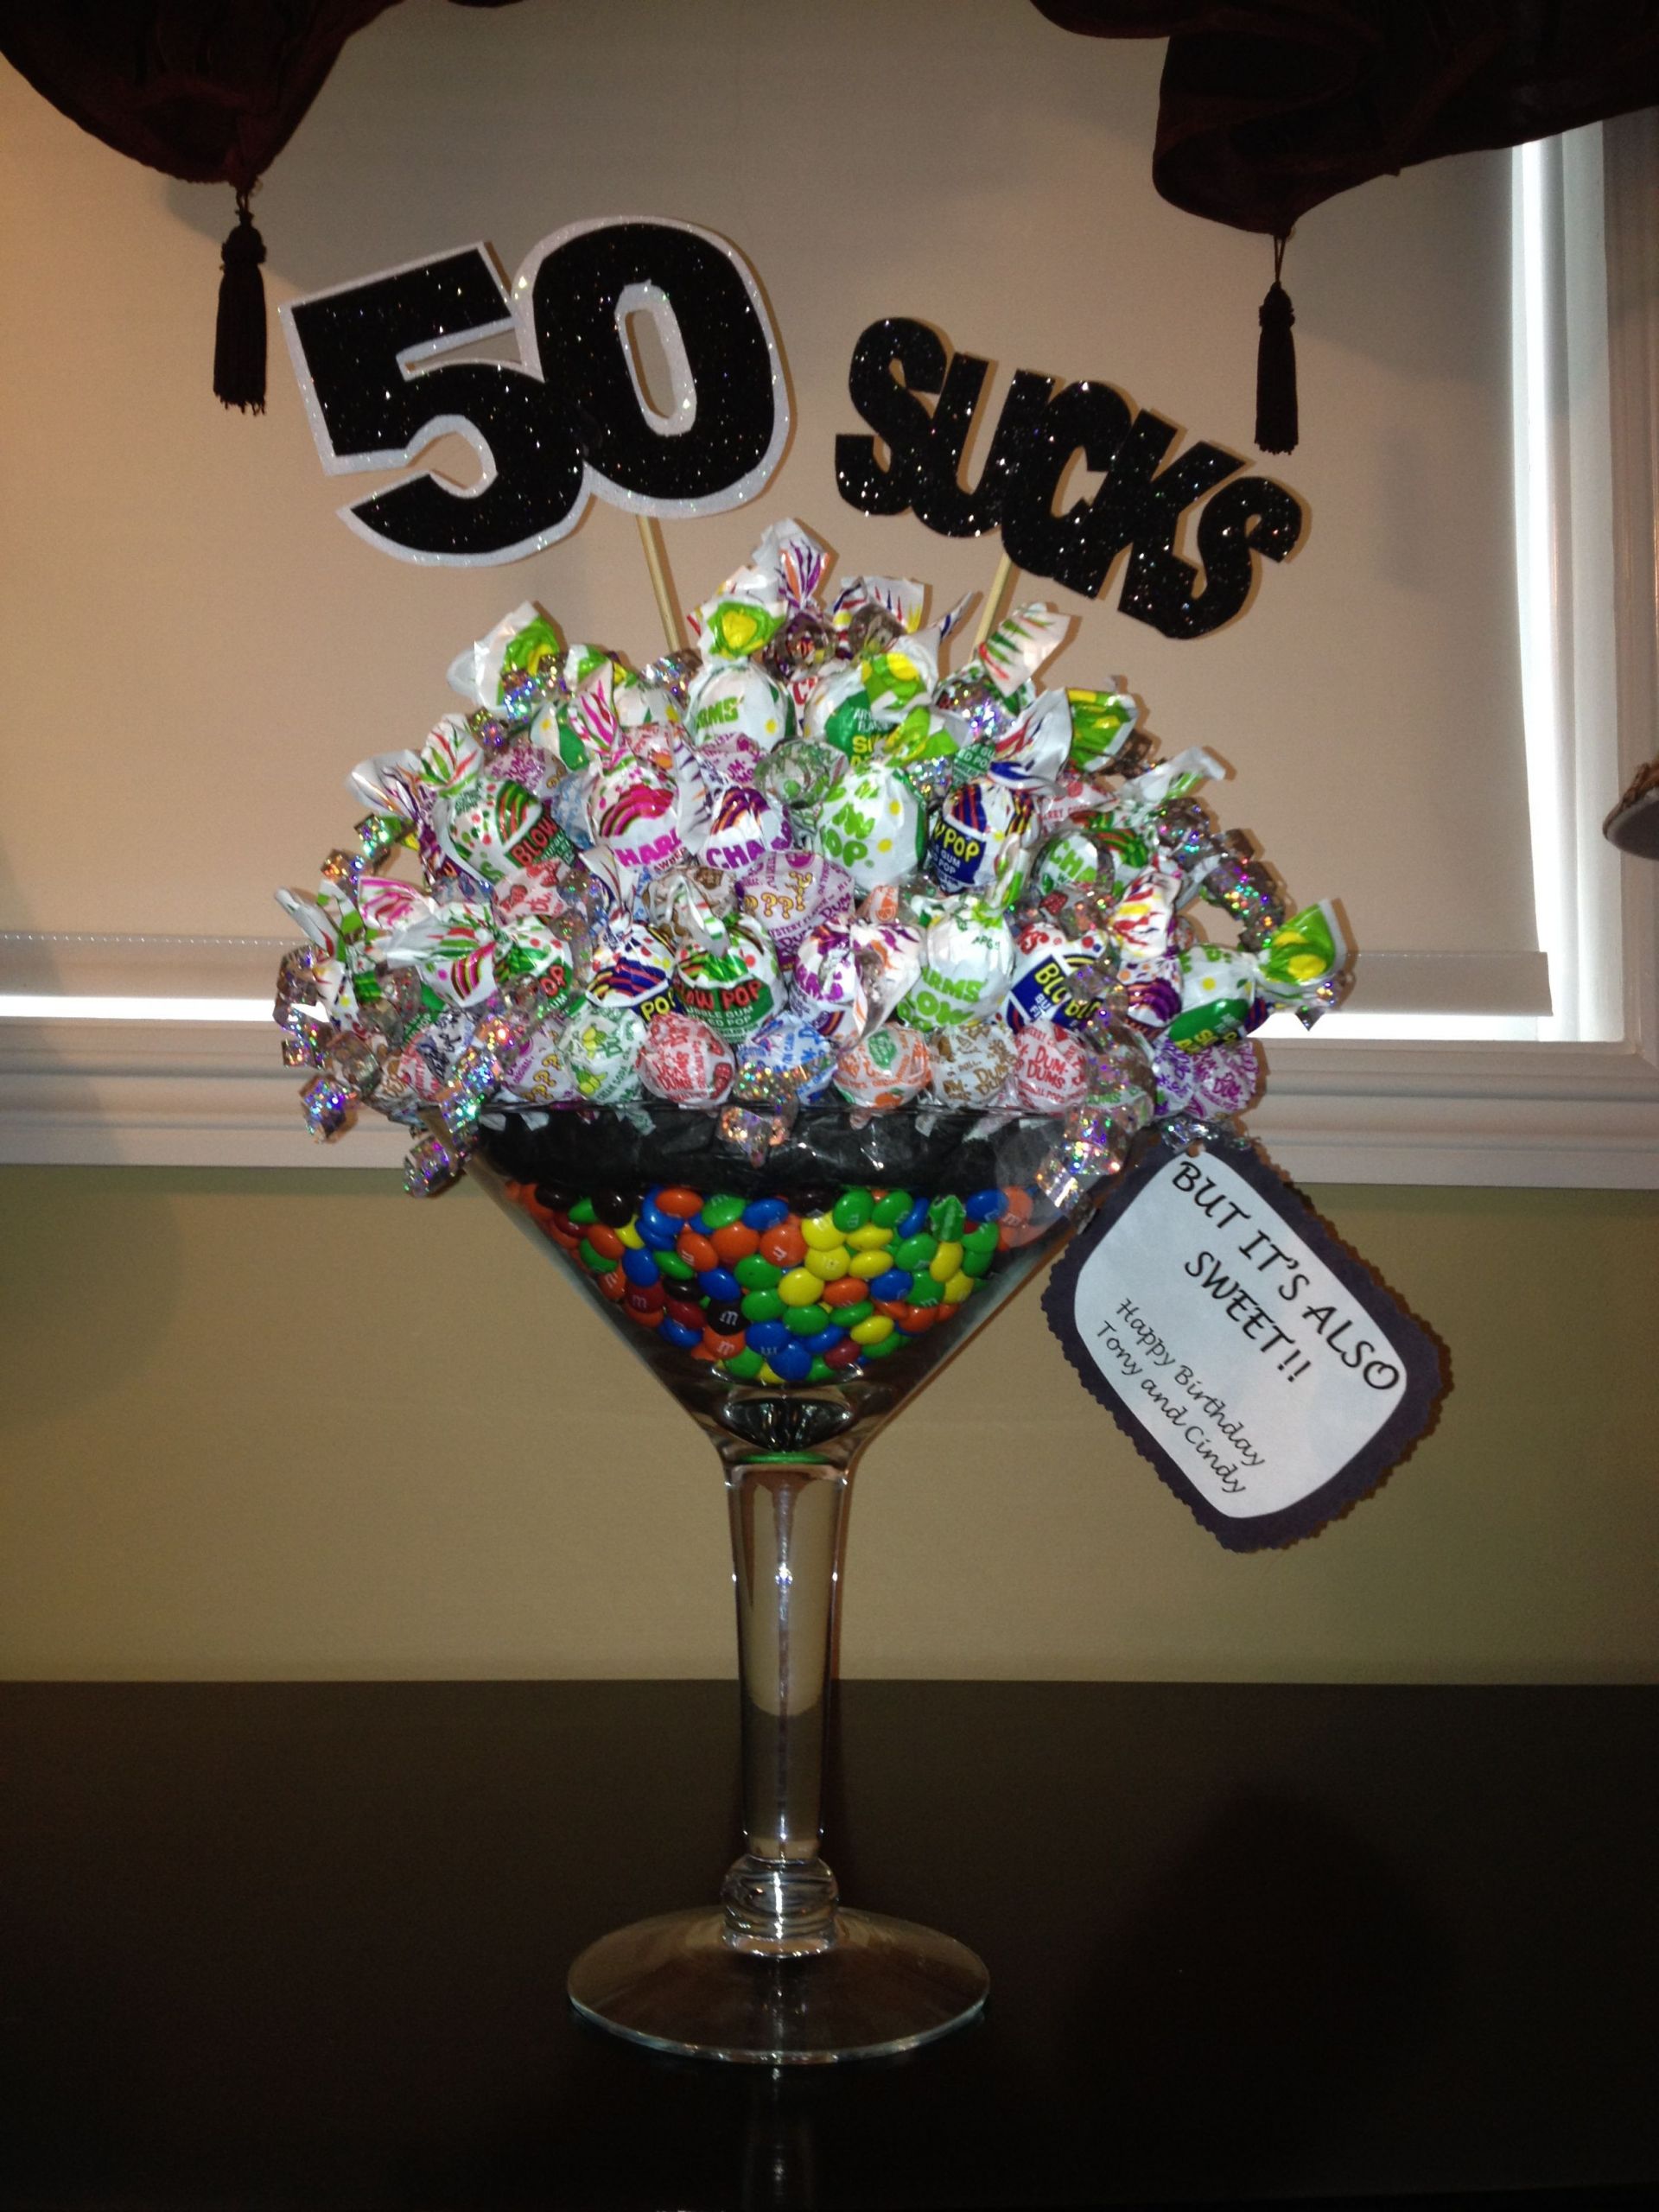 50th Birthday Party Decoration Ideas
 Pin on 50th Birthday Party Favors and Ideas